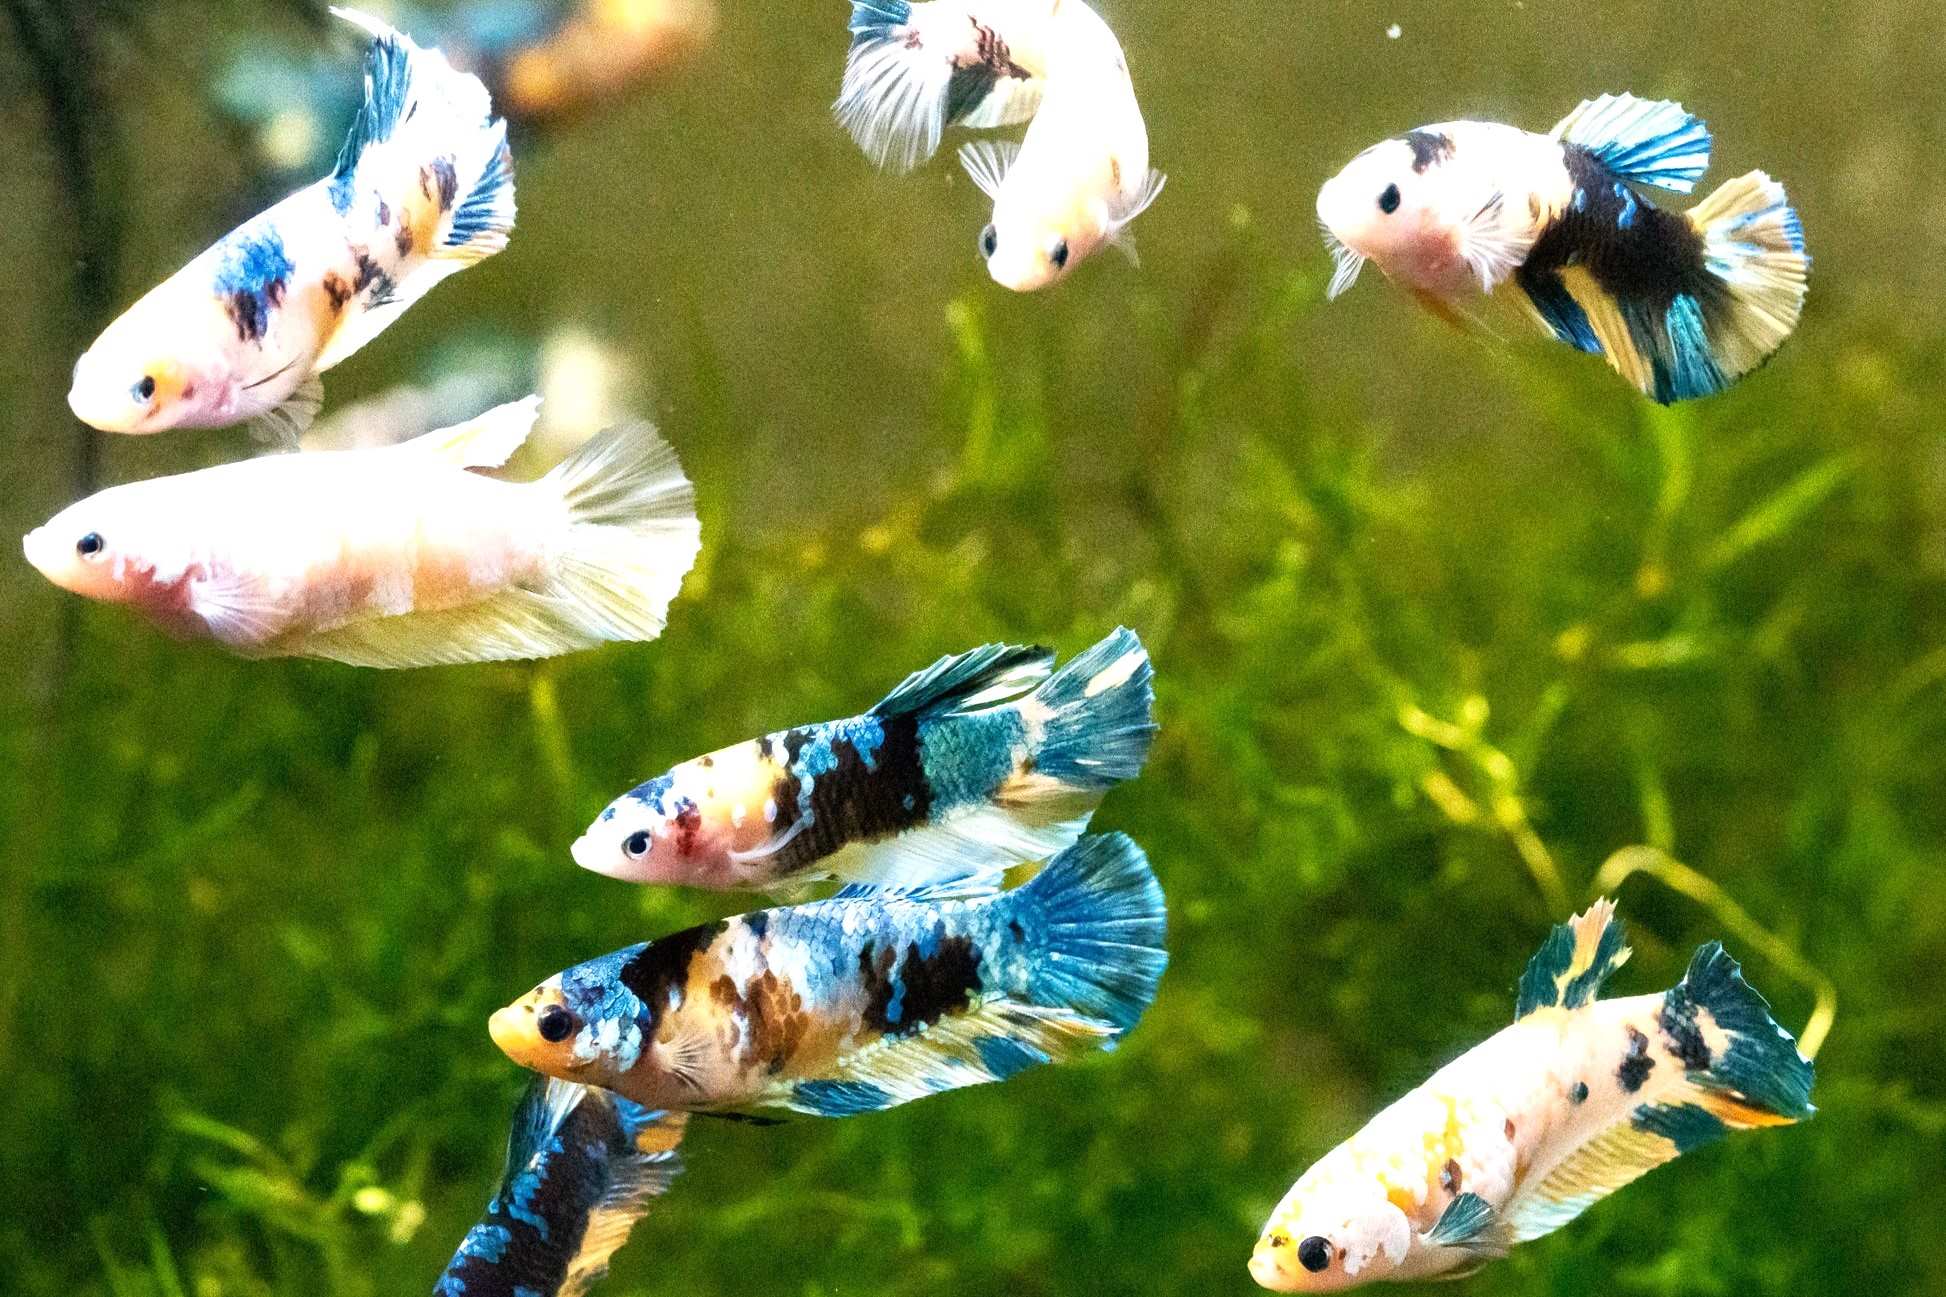 The Ultimate Guide To Keeping Four Female Bettas In A 10-Gallon Tank!